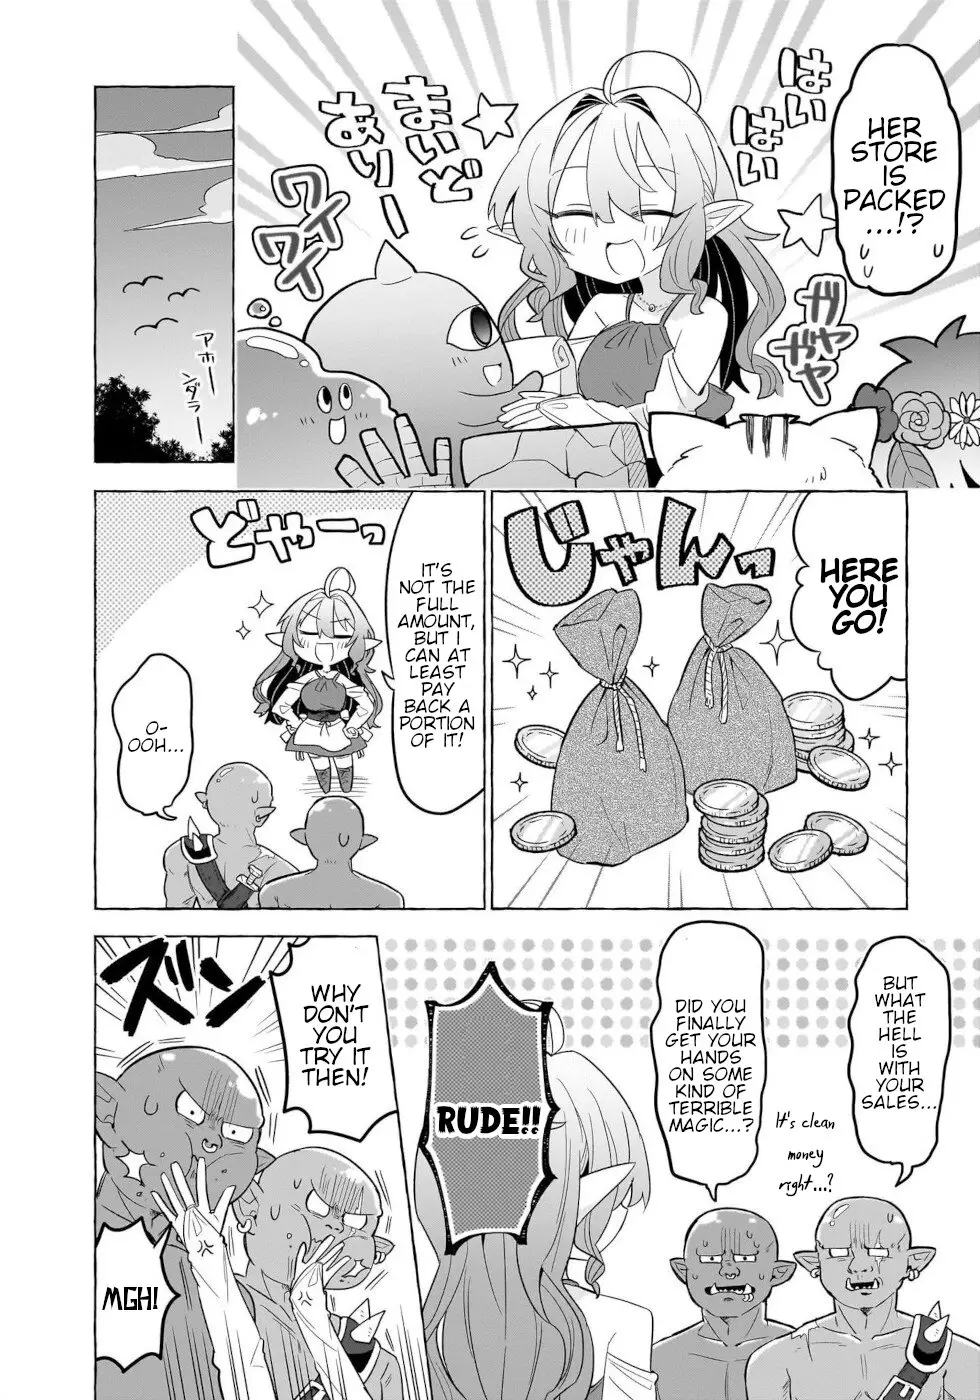 Sweets, Elf, And A High School Girl - 1 page 33-e9b39f32